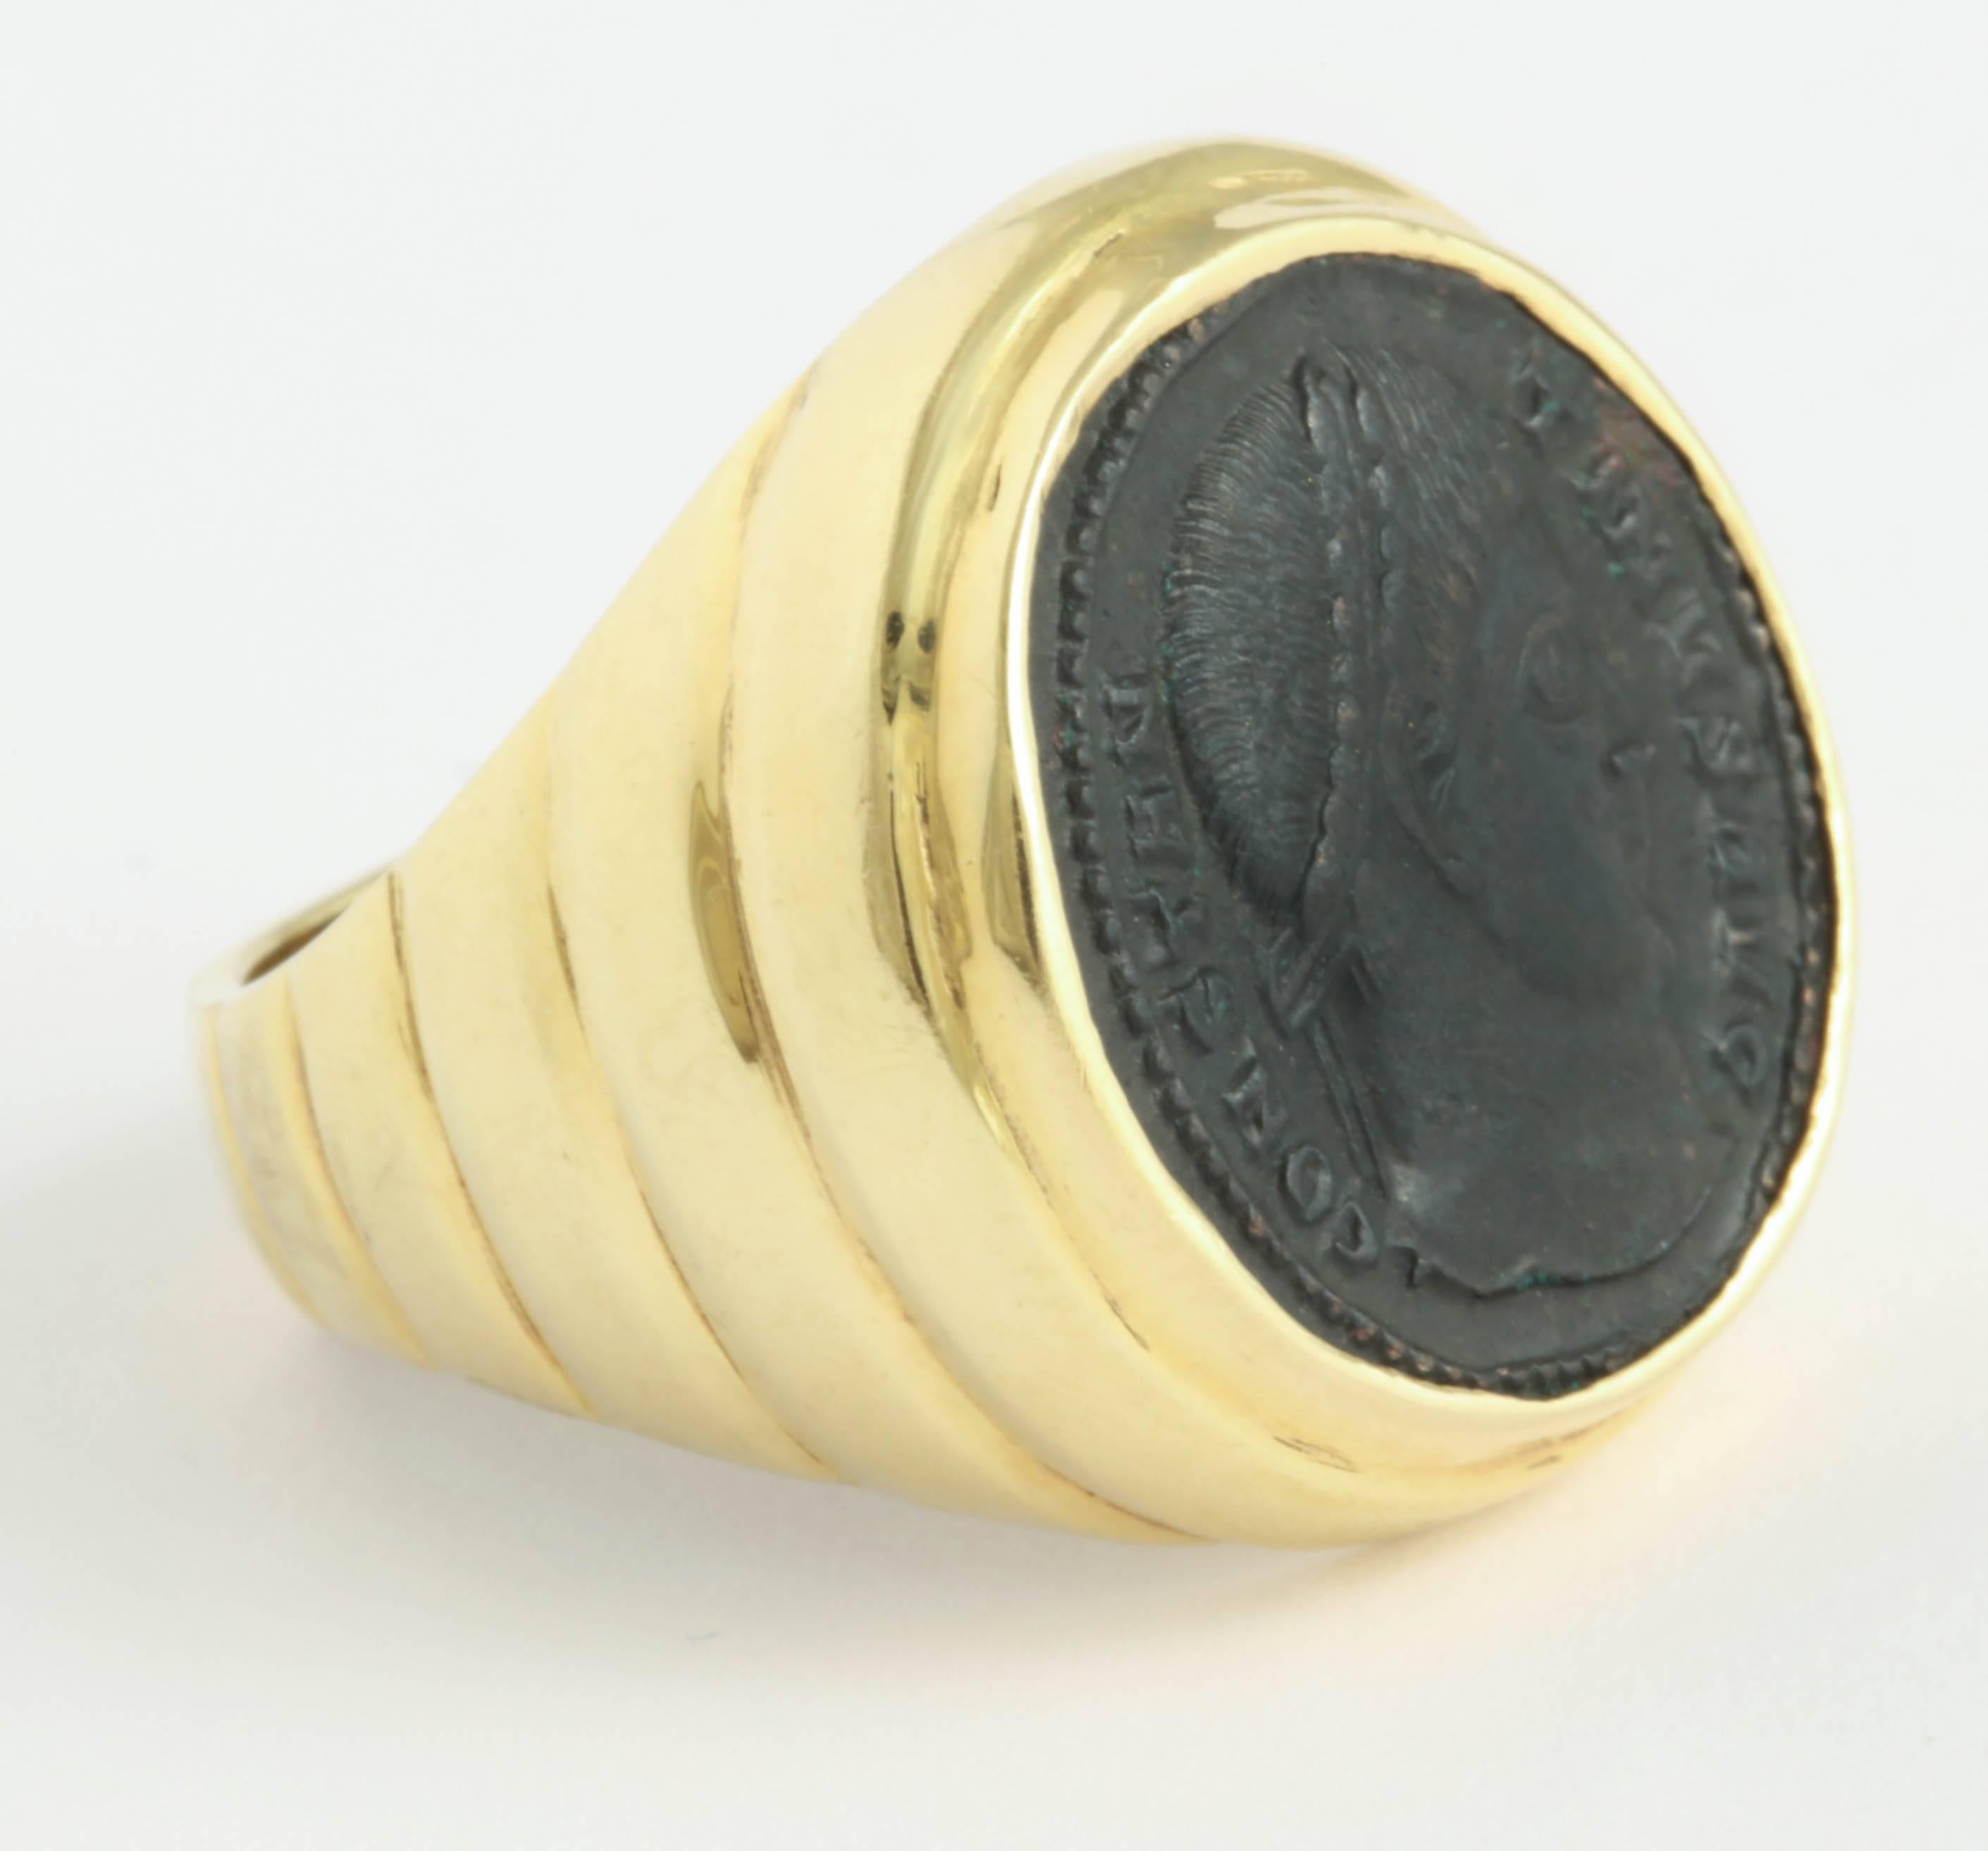 Classical Roman Bronze Head of Constantine 1, Mounted as a Ring